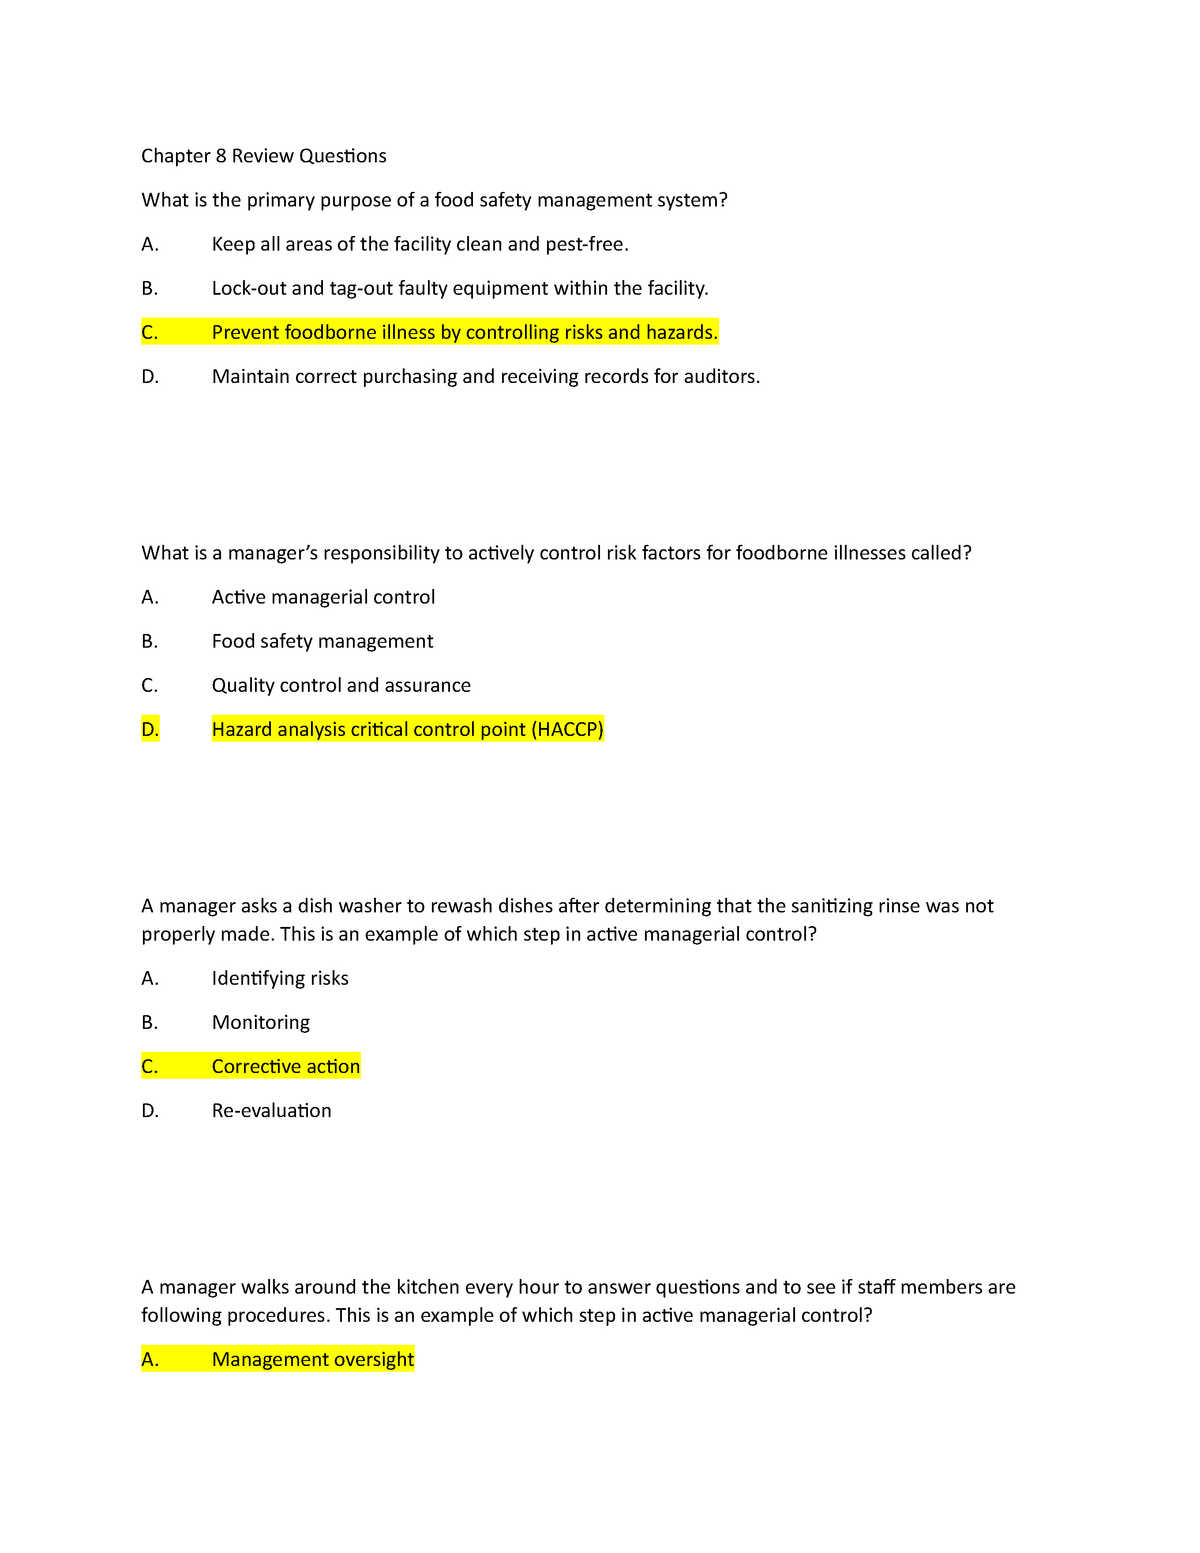 Chapter 8 Review Questions Servsafe Manager Studocu